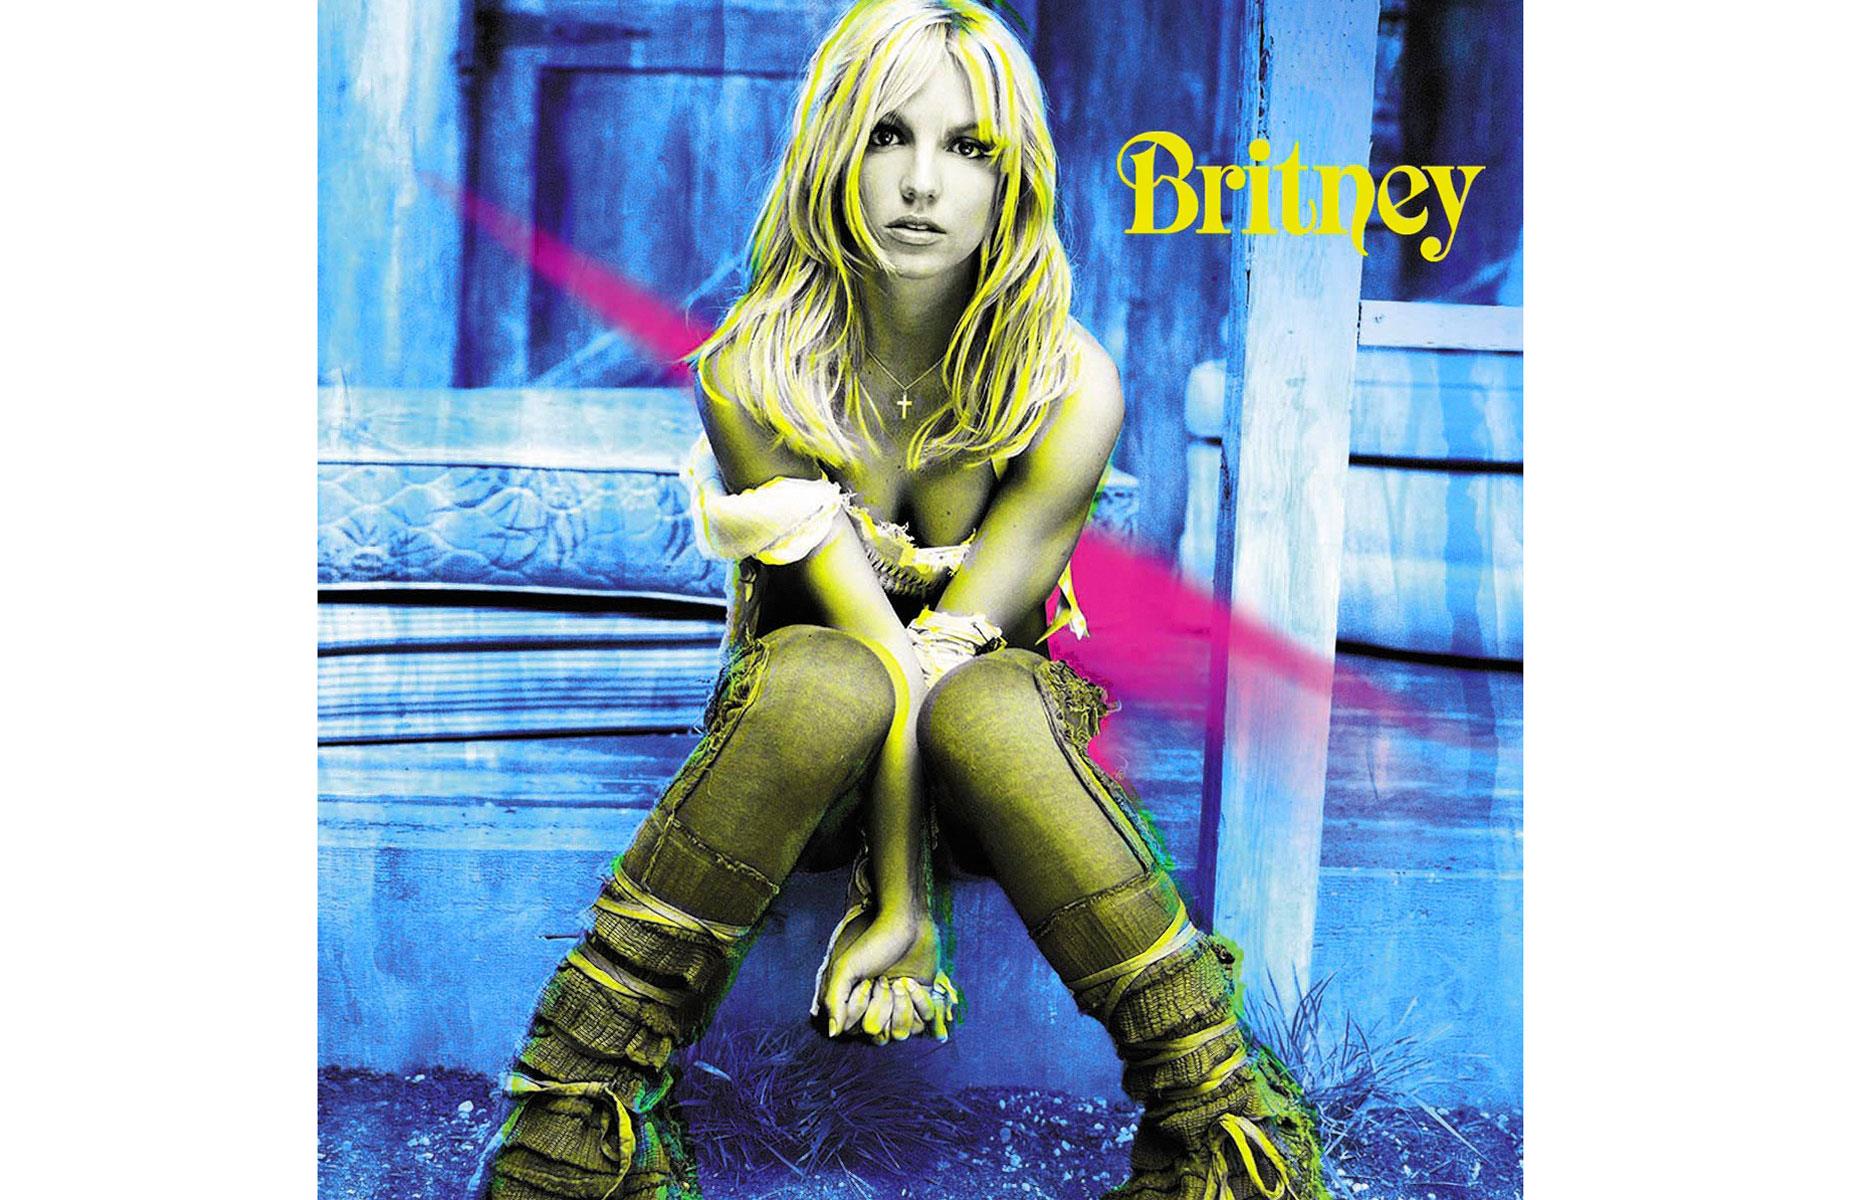 Britney Spears – Britney: up to $283 (£240)